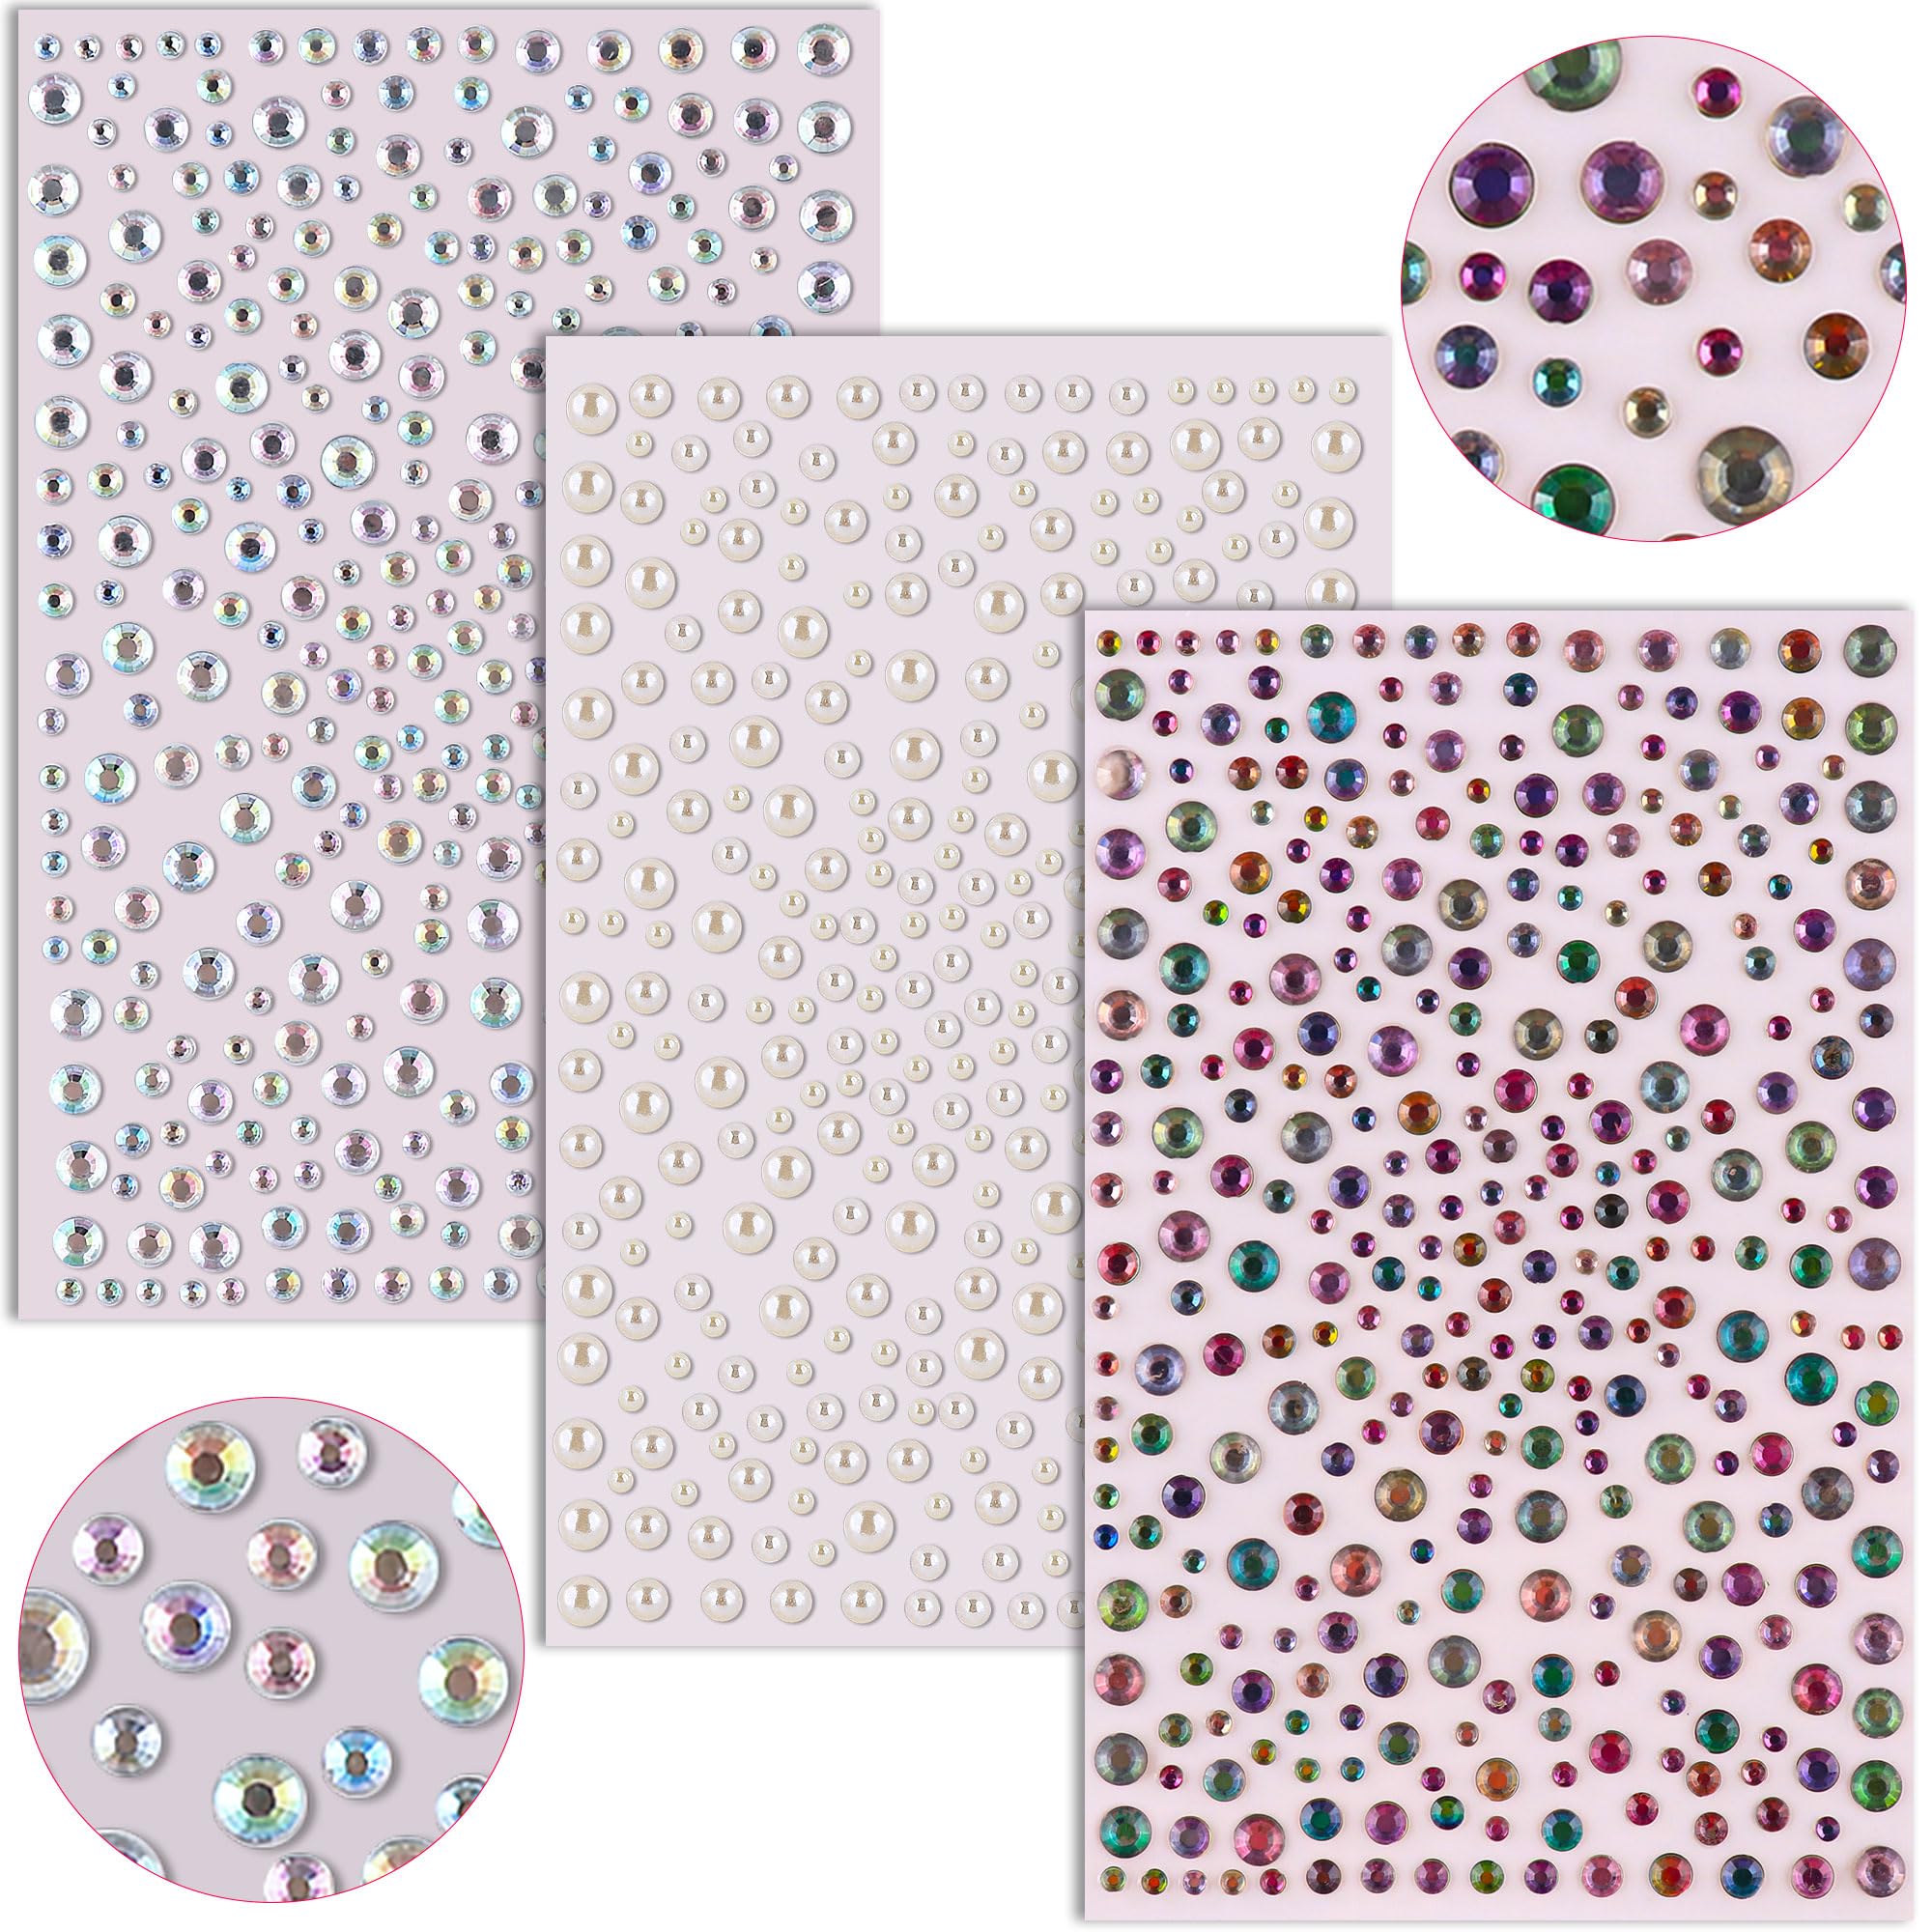 YGQQOY Face Gems,Facial Rhinestones Stickers, Hair Pearls Stickers, Eye Jewels, Festival Jewels Pearls Gems Stickers for Face Eye Makeup Hair Body Sticker on Proms Concert,1050pcs